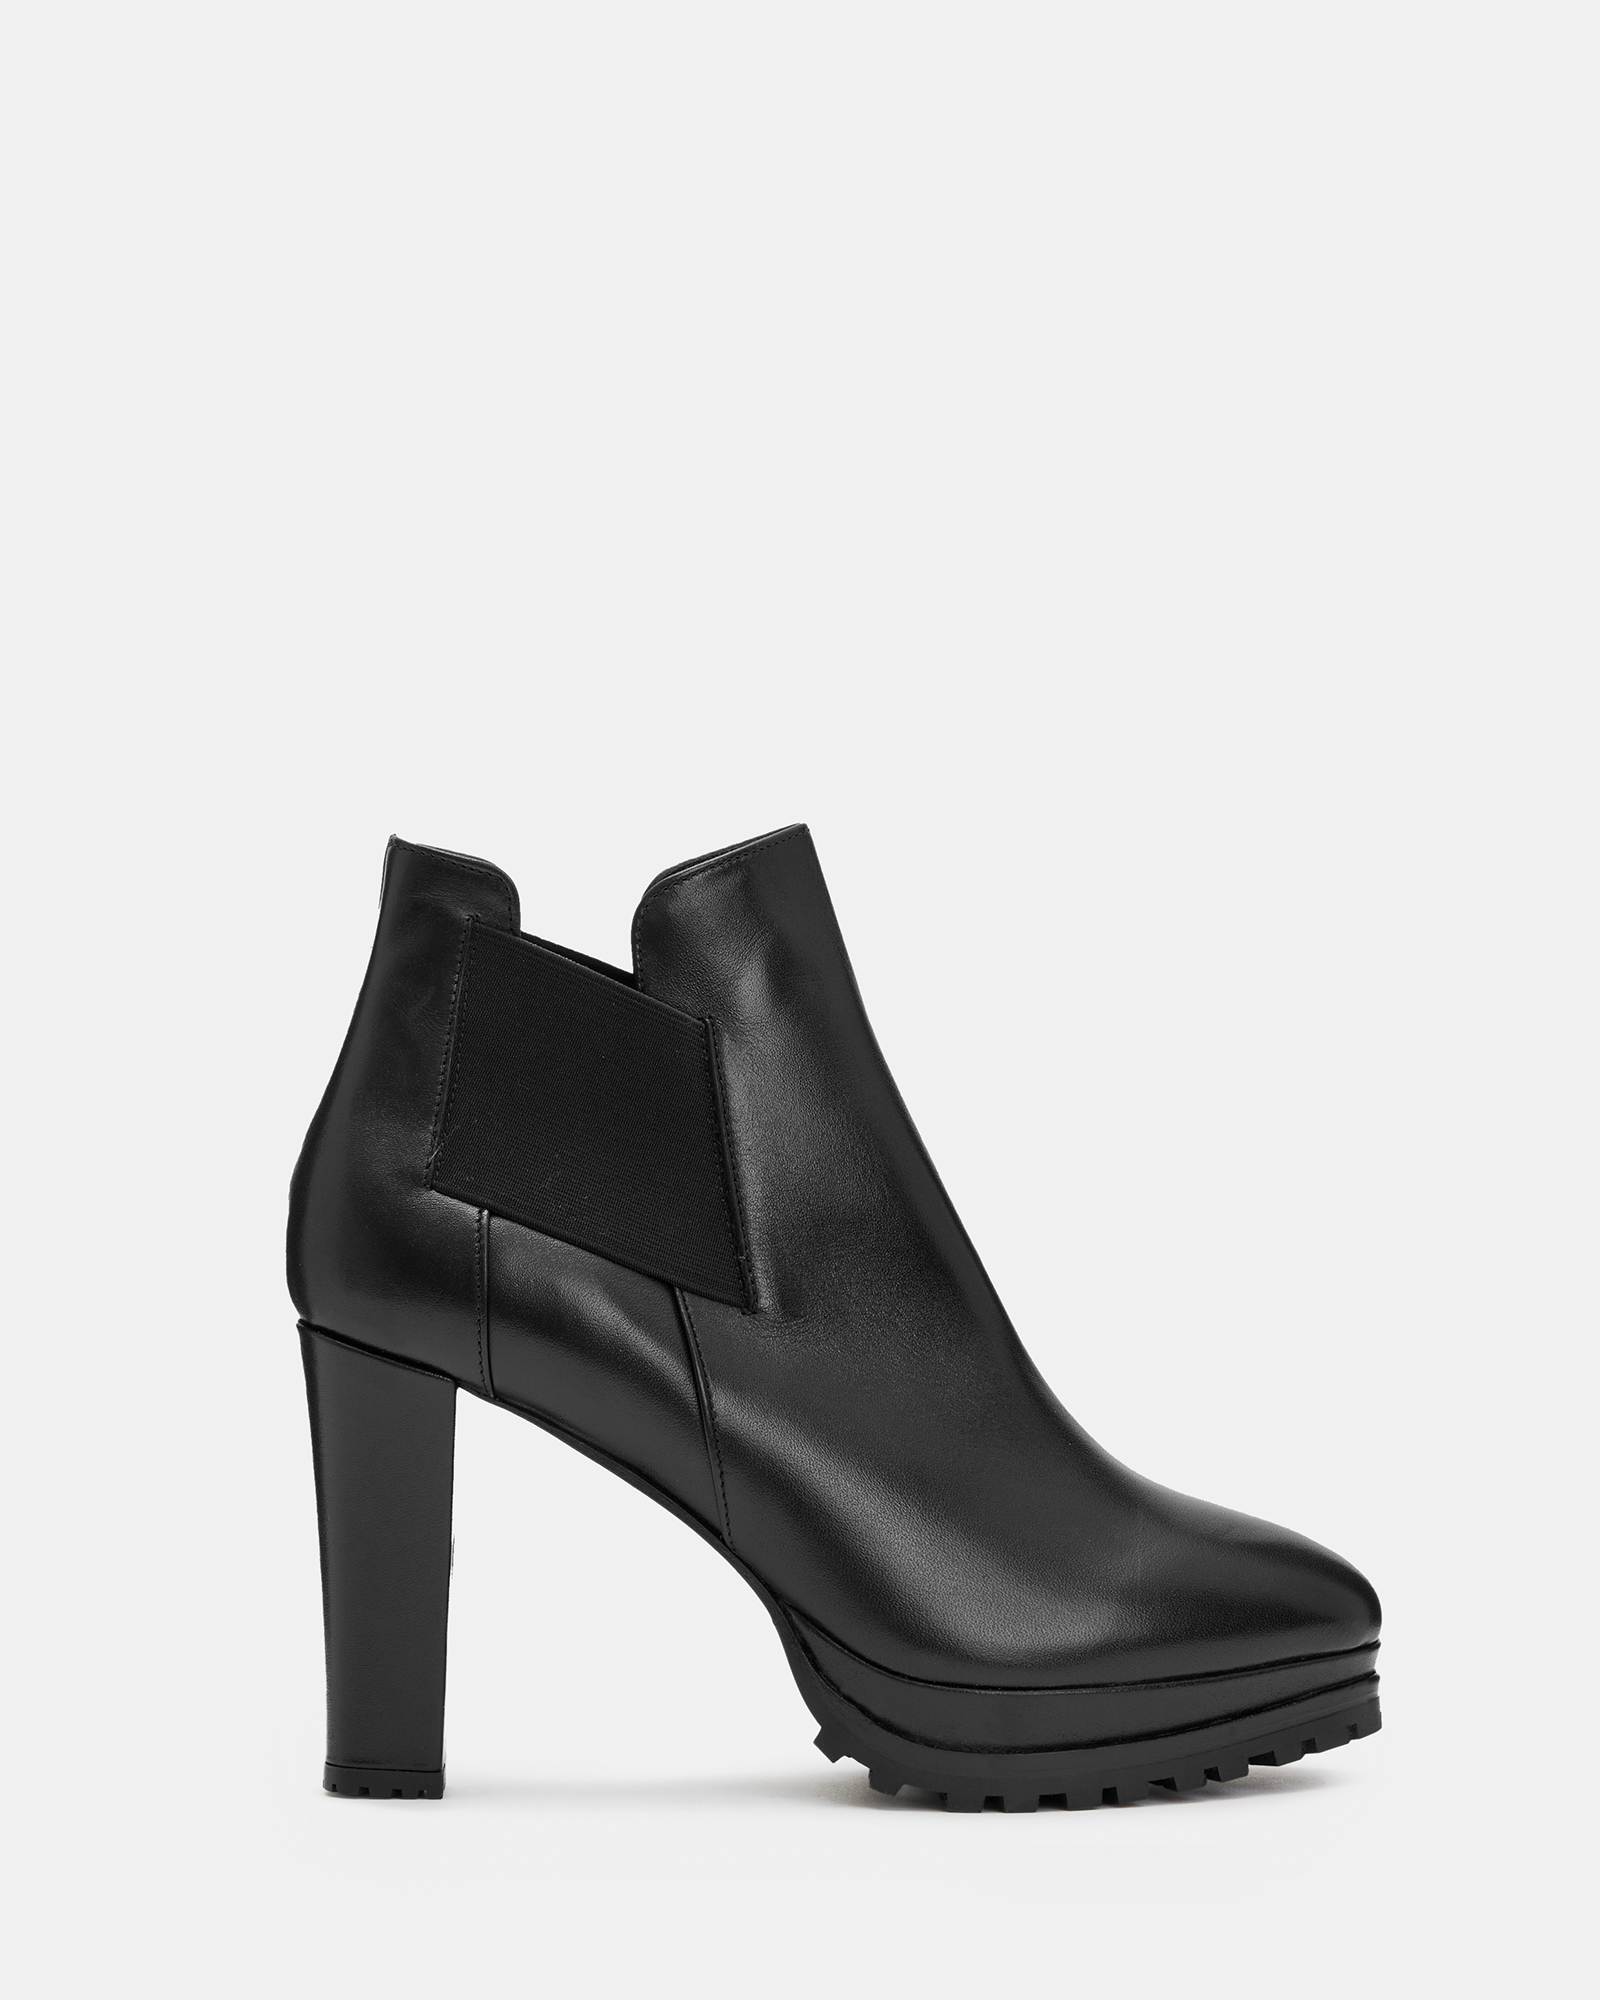 AllSaints Sarris Heeled Leather Boots